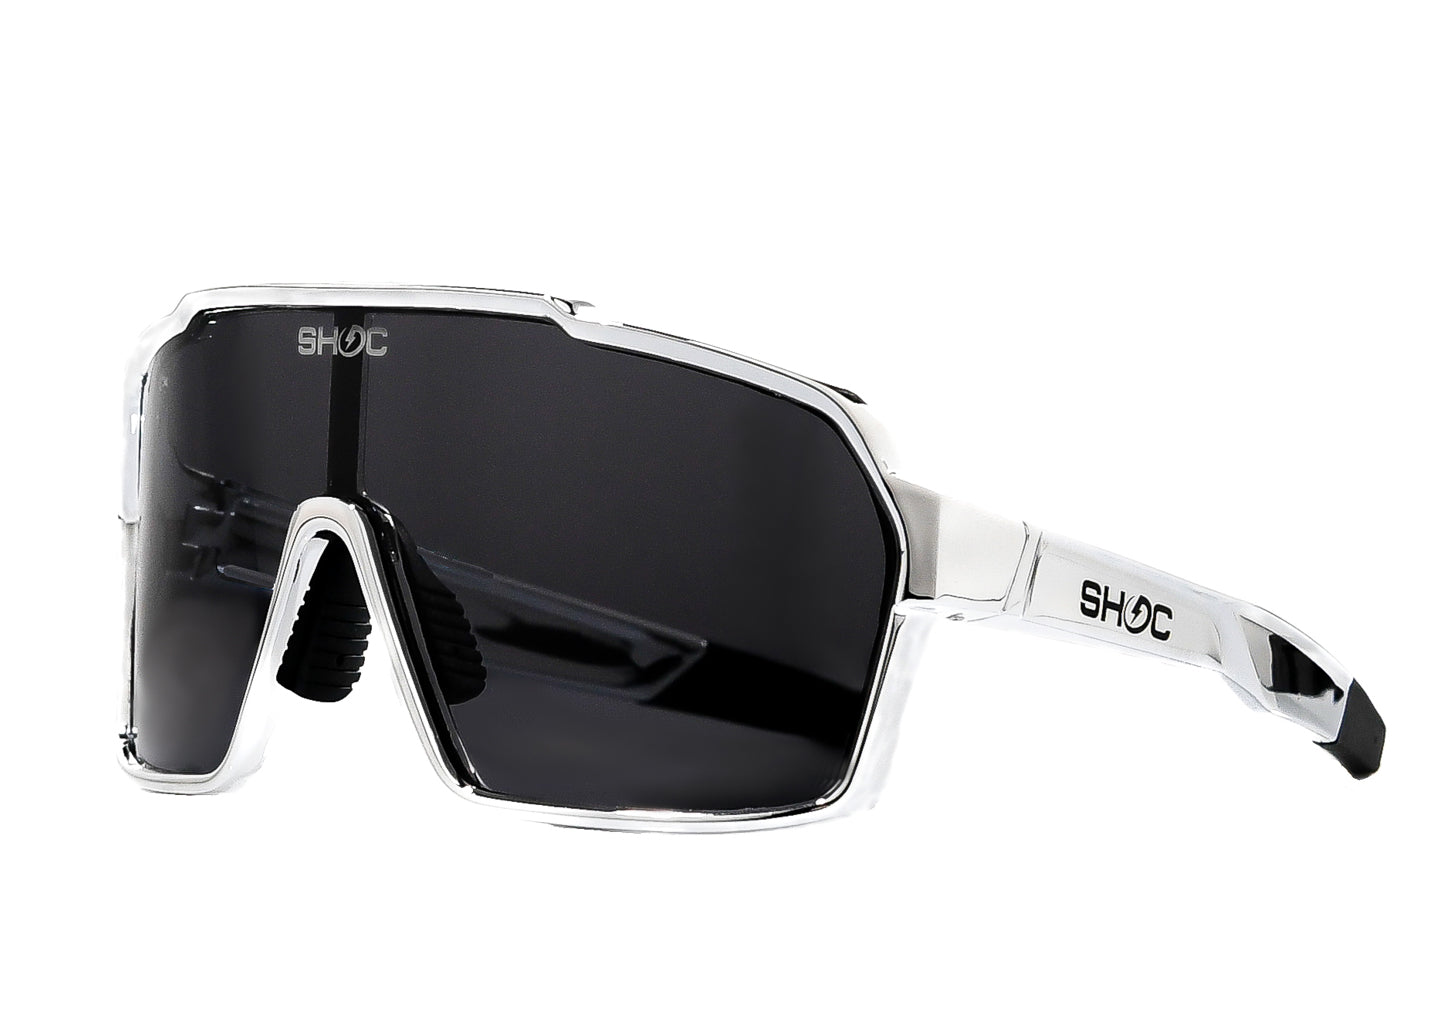 SHOC Waves Sunglasses! The best silver wraparound sunglasses made by the indie sports brand, SHOC.